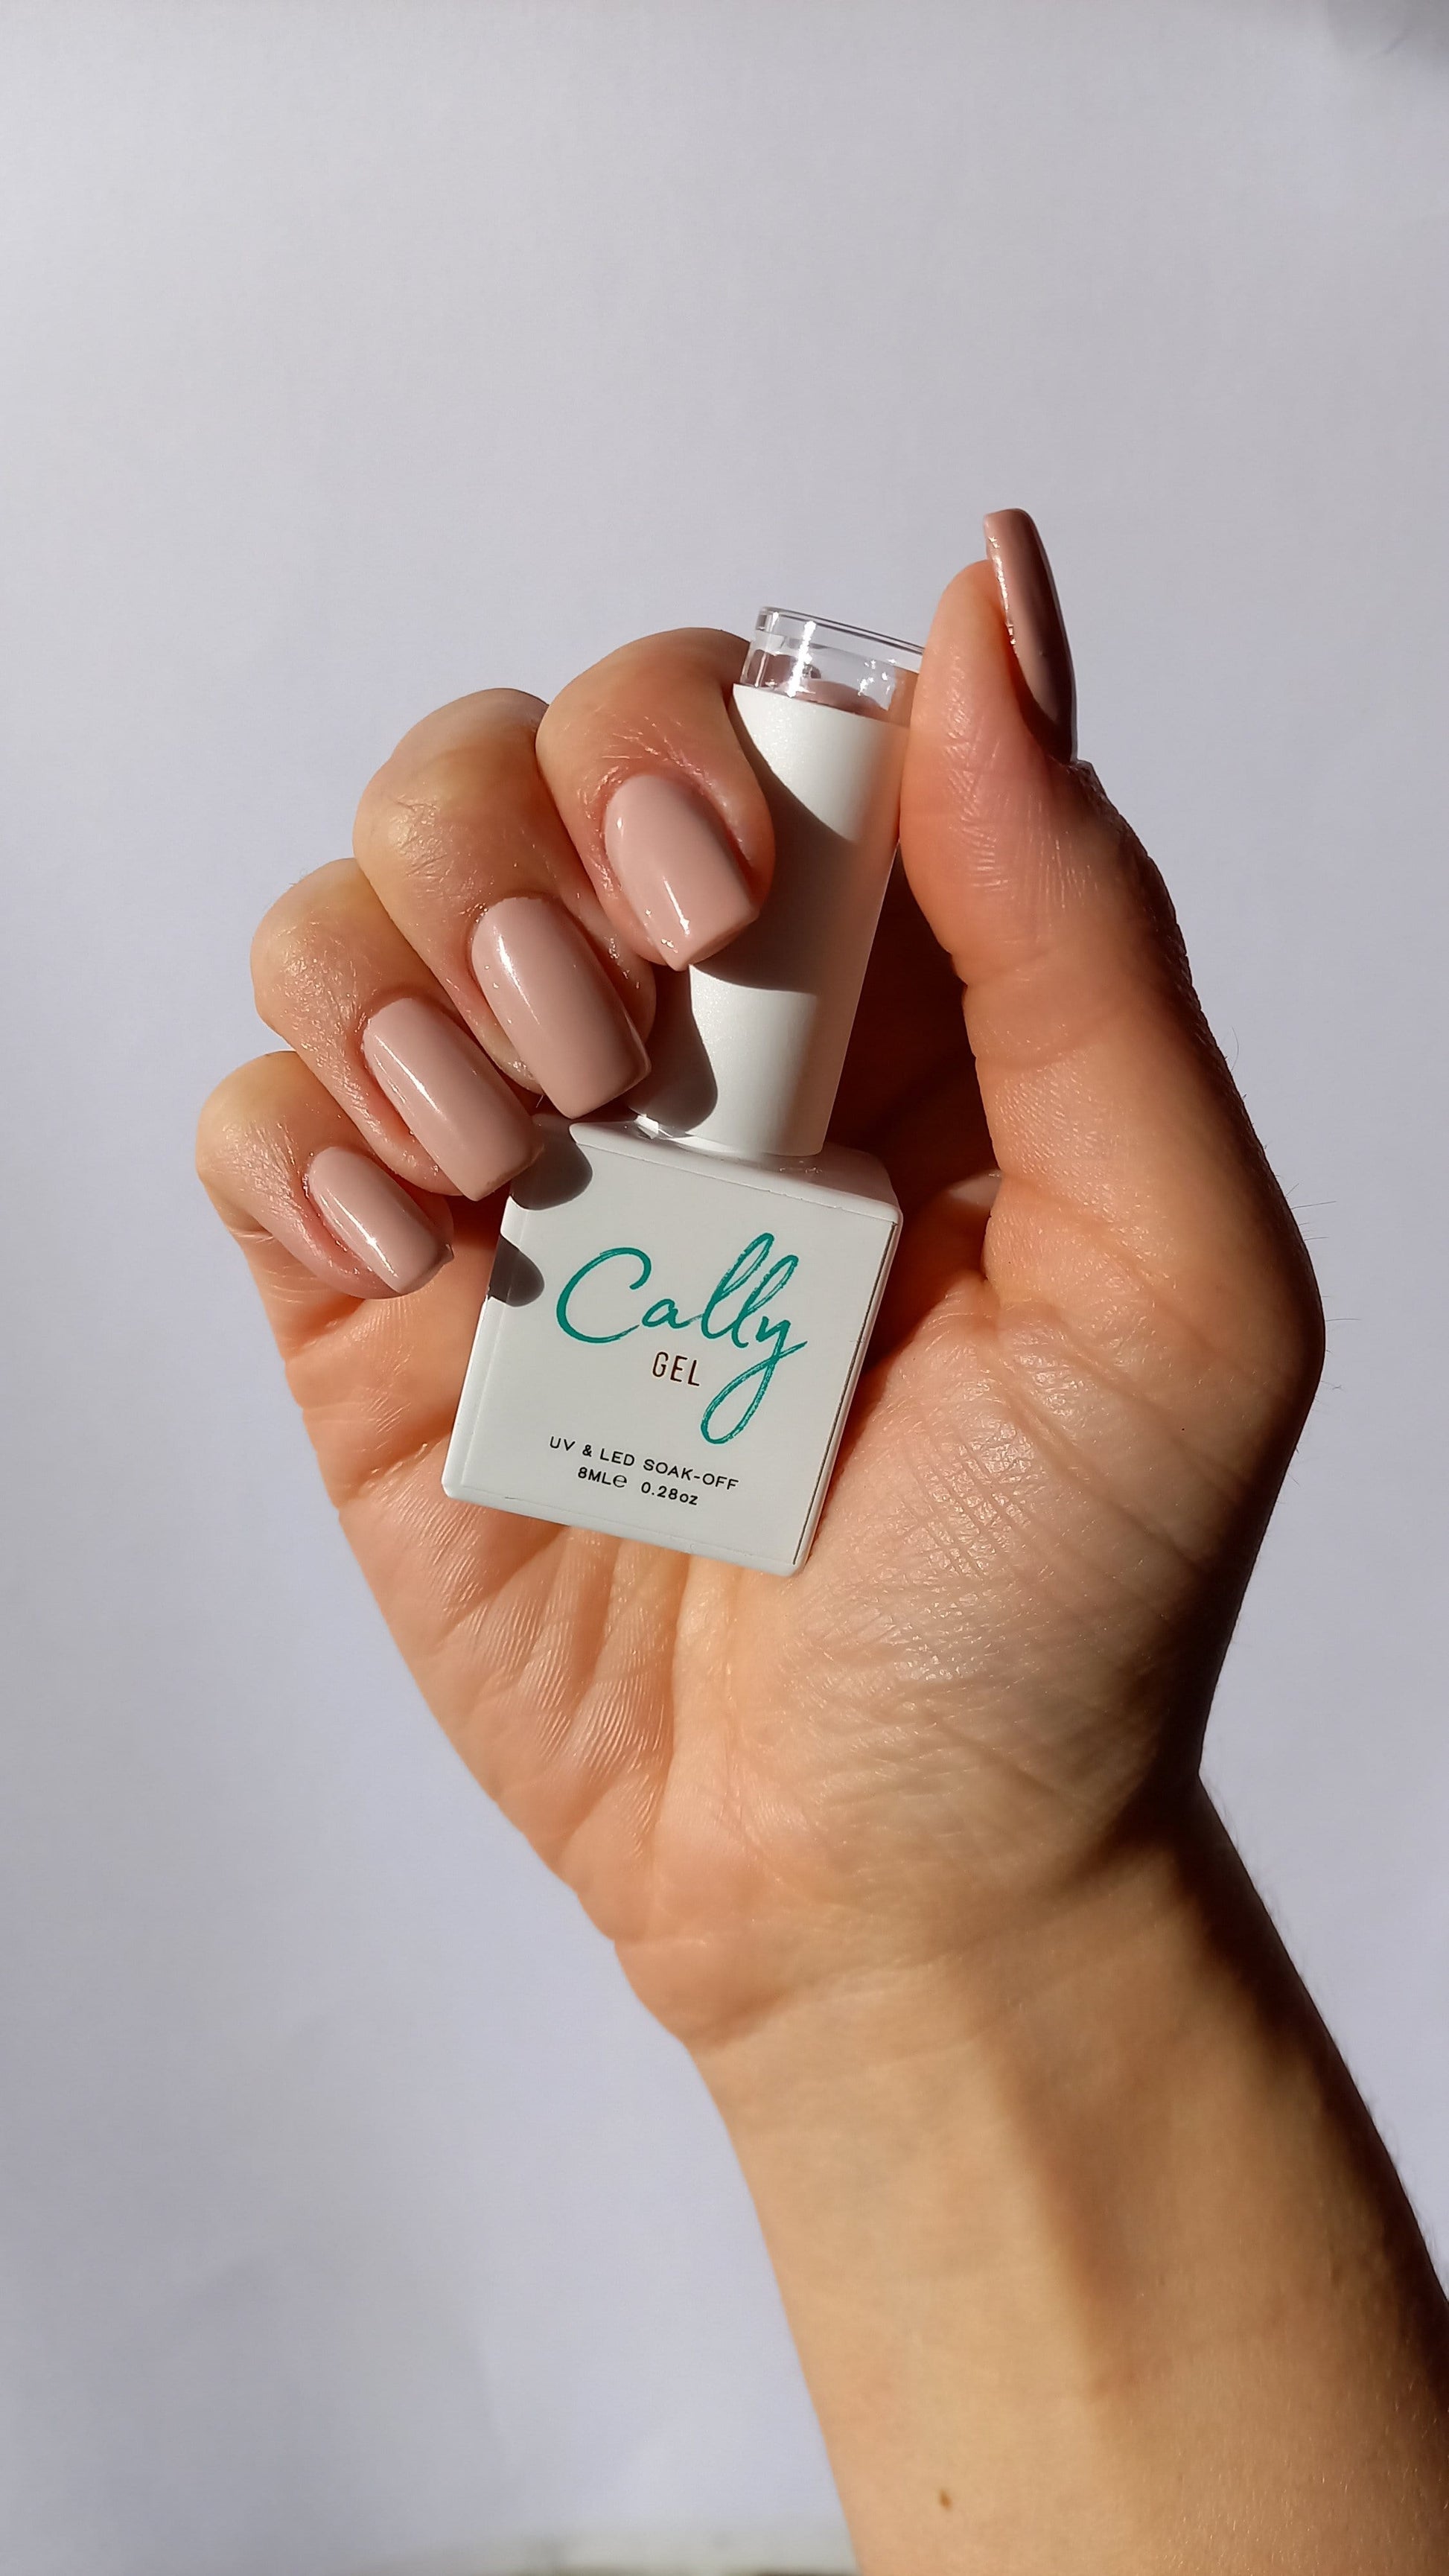 Manicured with Peony Petal Cally Gel Nail Polish and Bottle in Hand